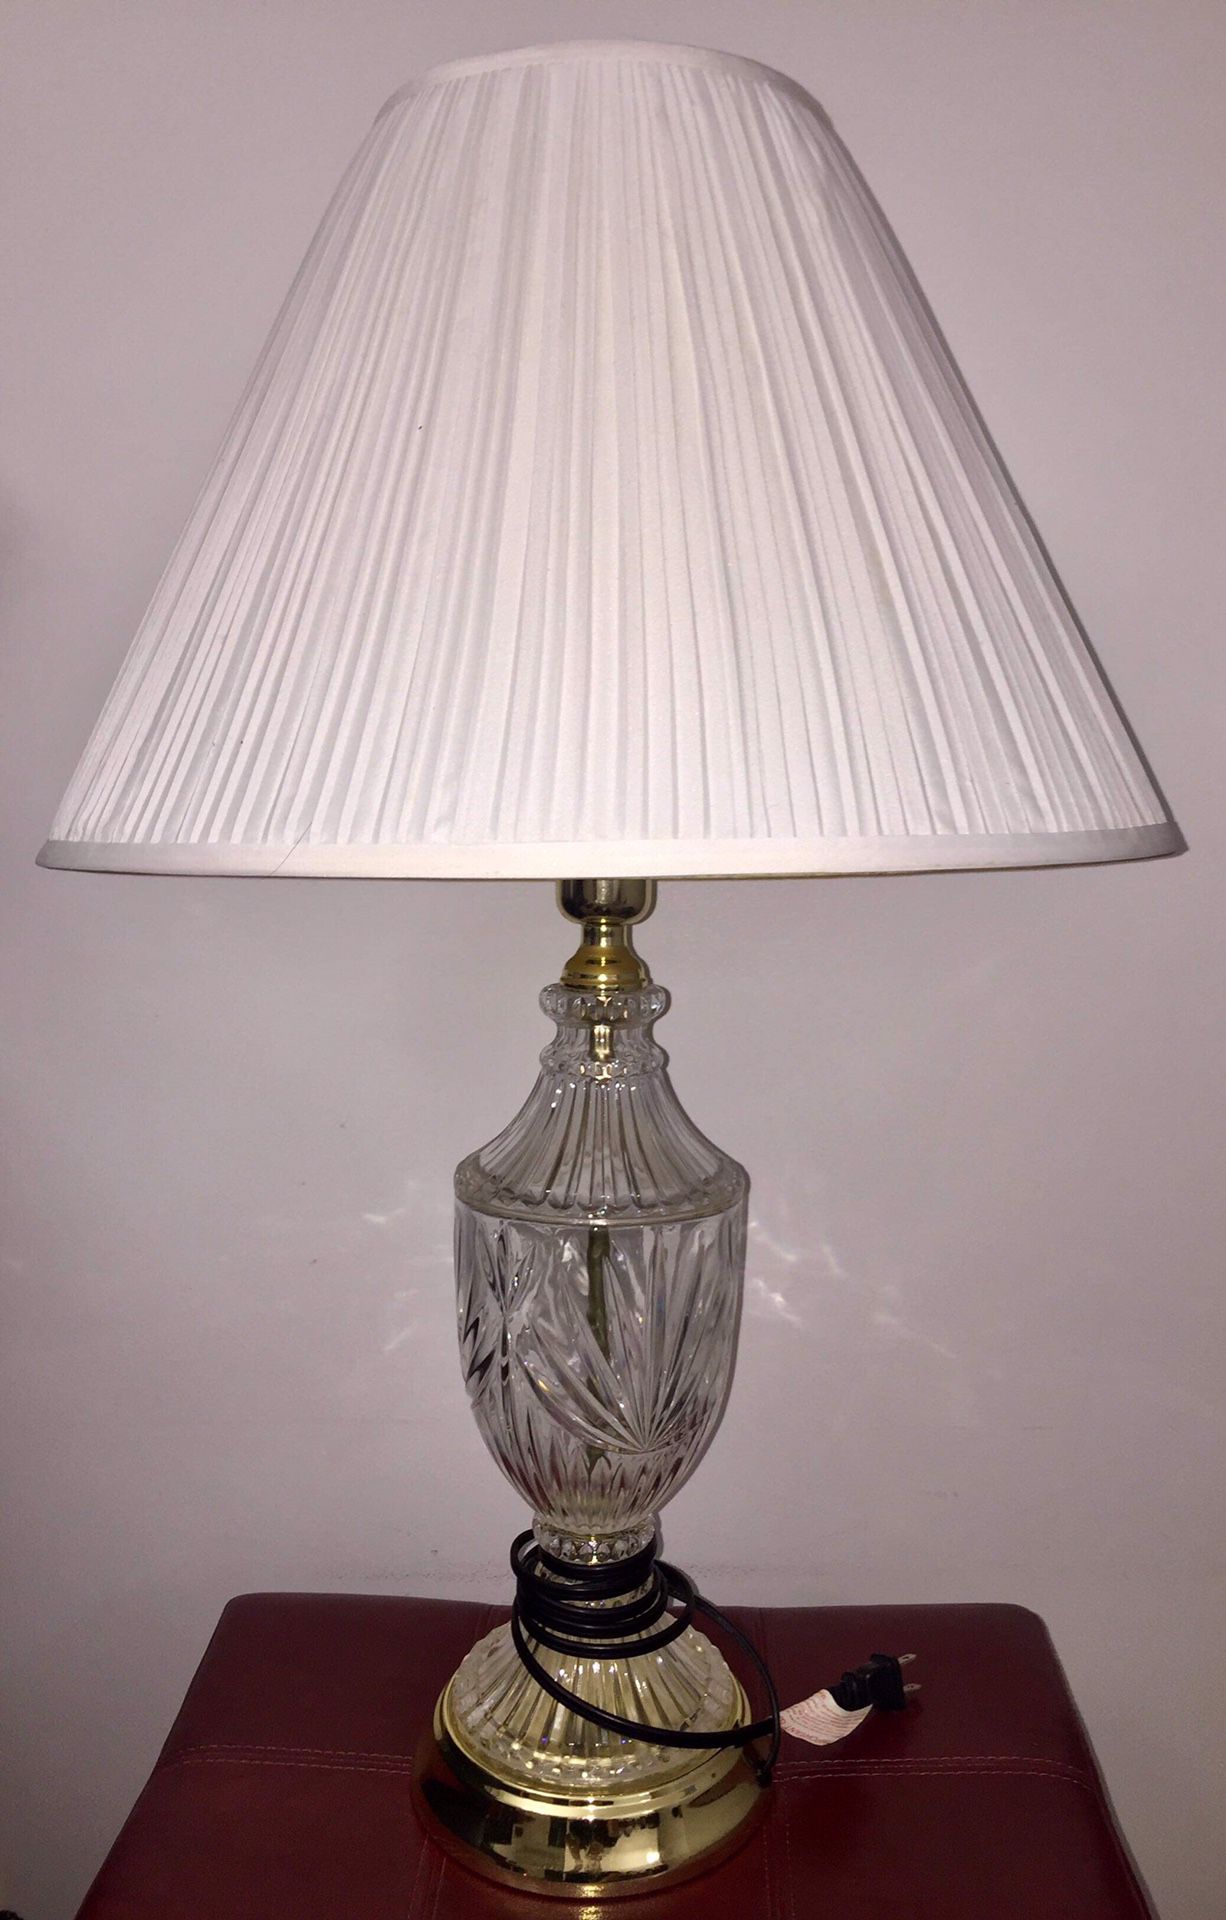 Crystal Table Lamp - Works!